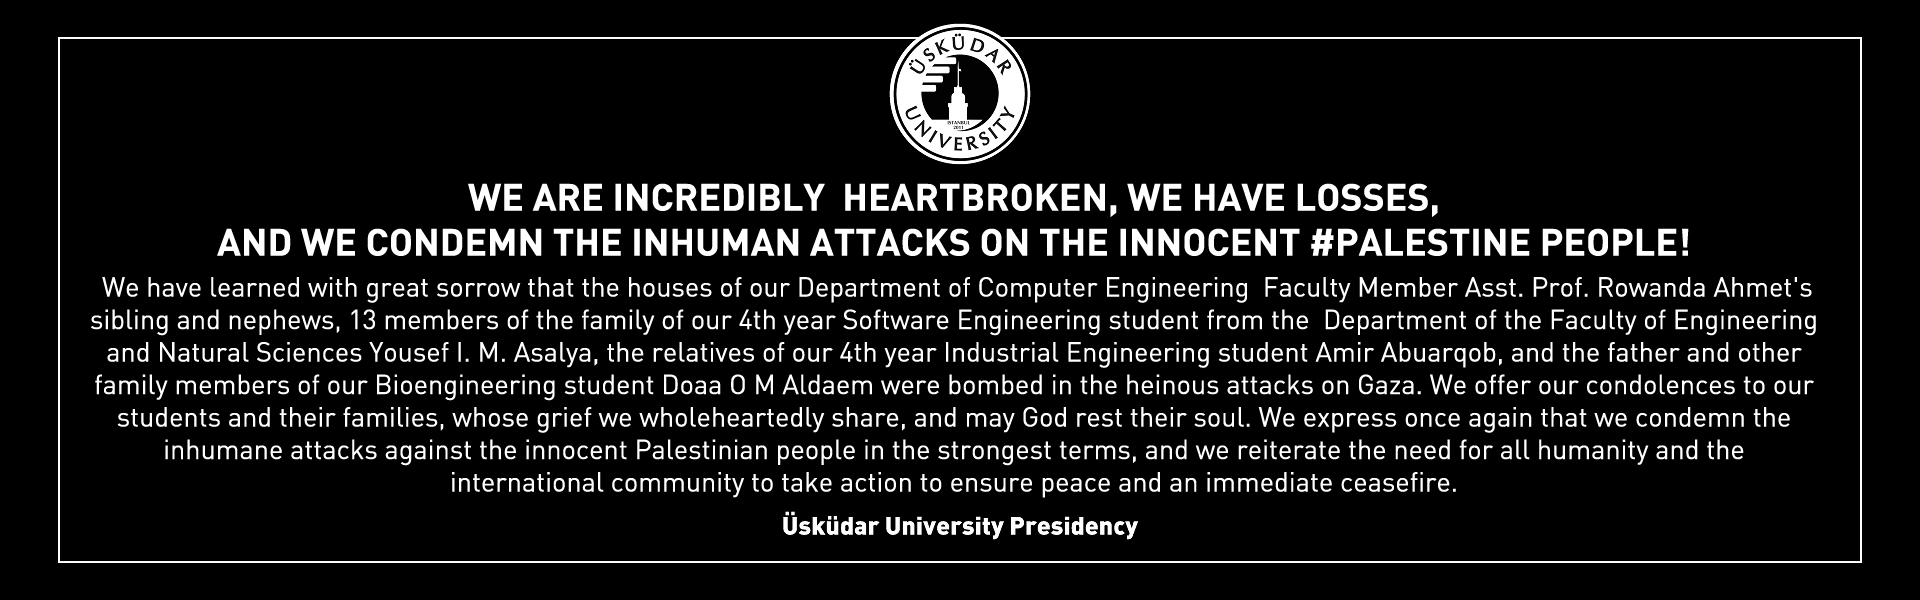 WE ARE INCREDIBLY HEARTBROKEN, WE HAVE LOSSES, AND WE CONDEMN THE INHUMAN ATTACKS ON THE INNOCENT PALESTINE PEOPLE!